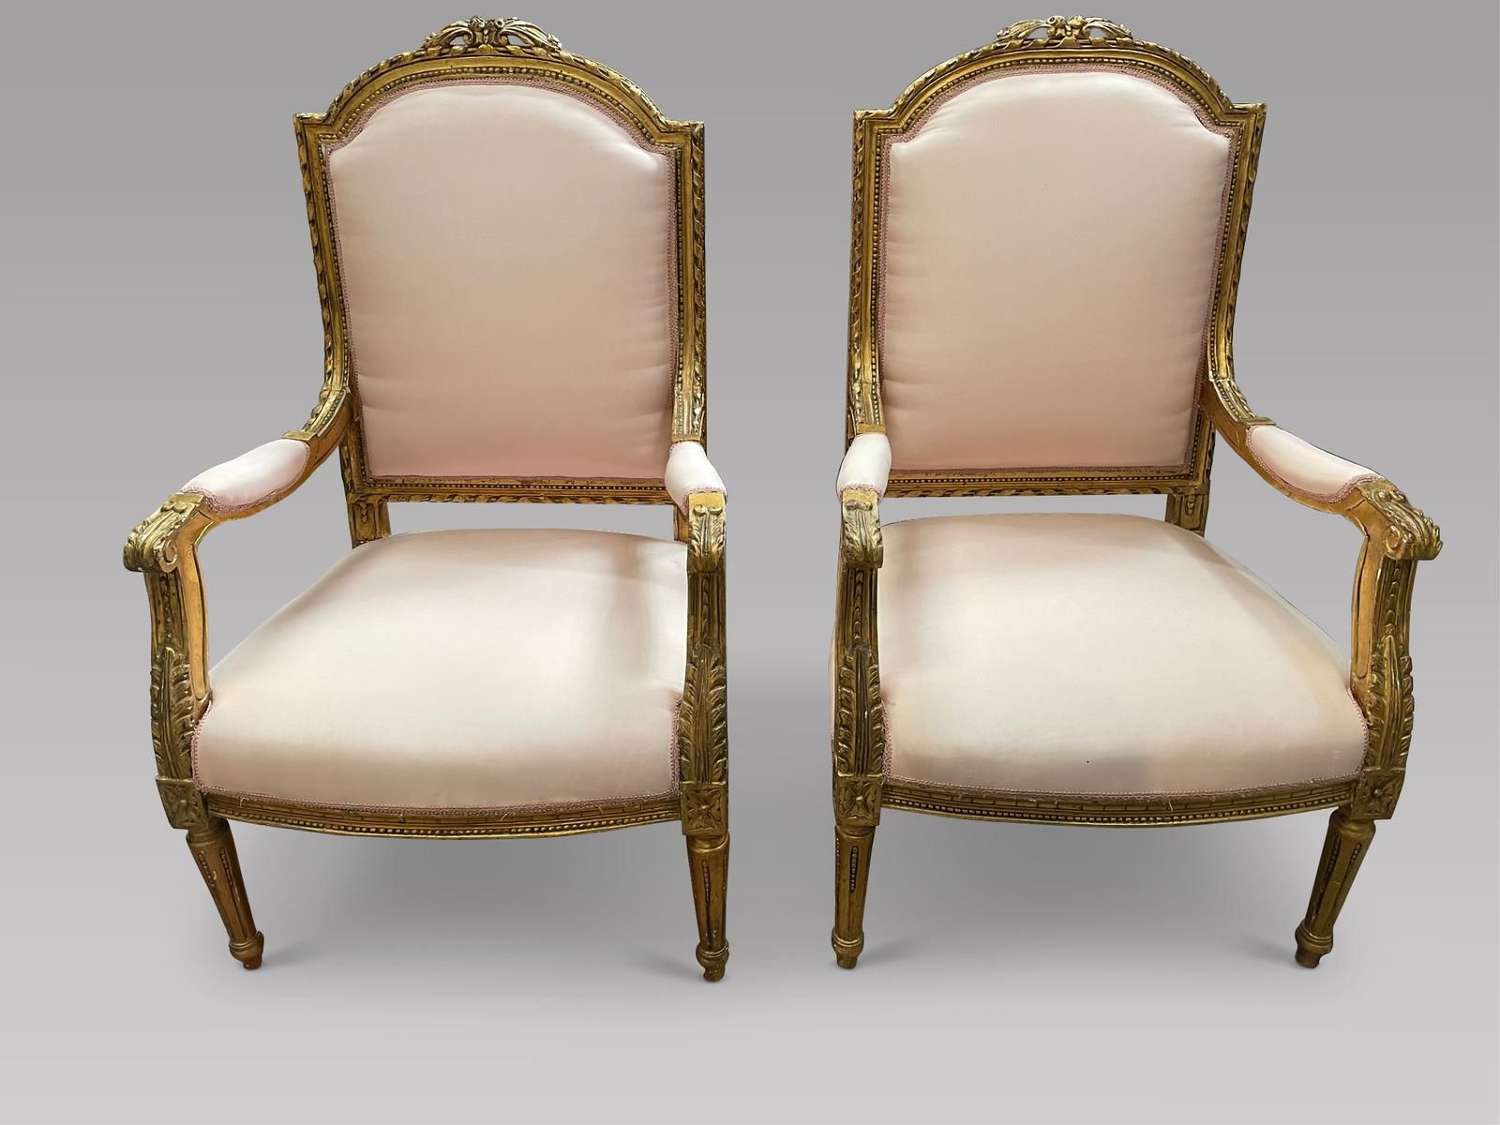 Pair of French Giltwood Fauteuils